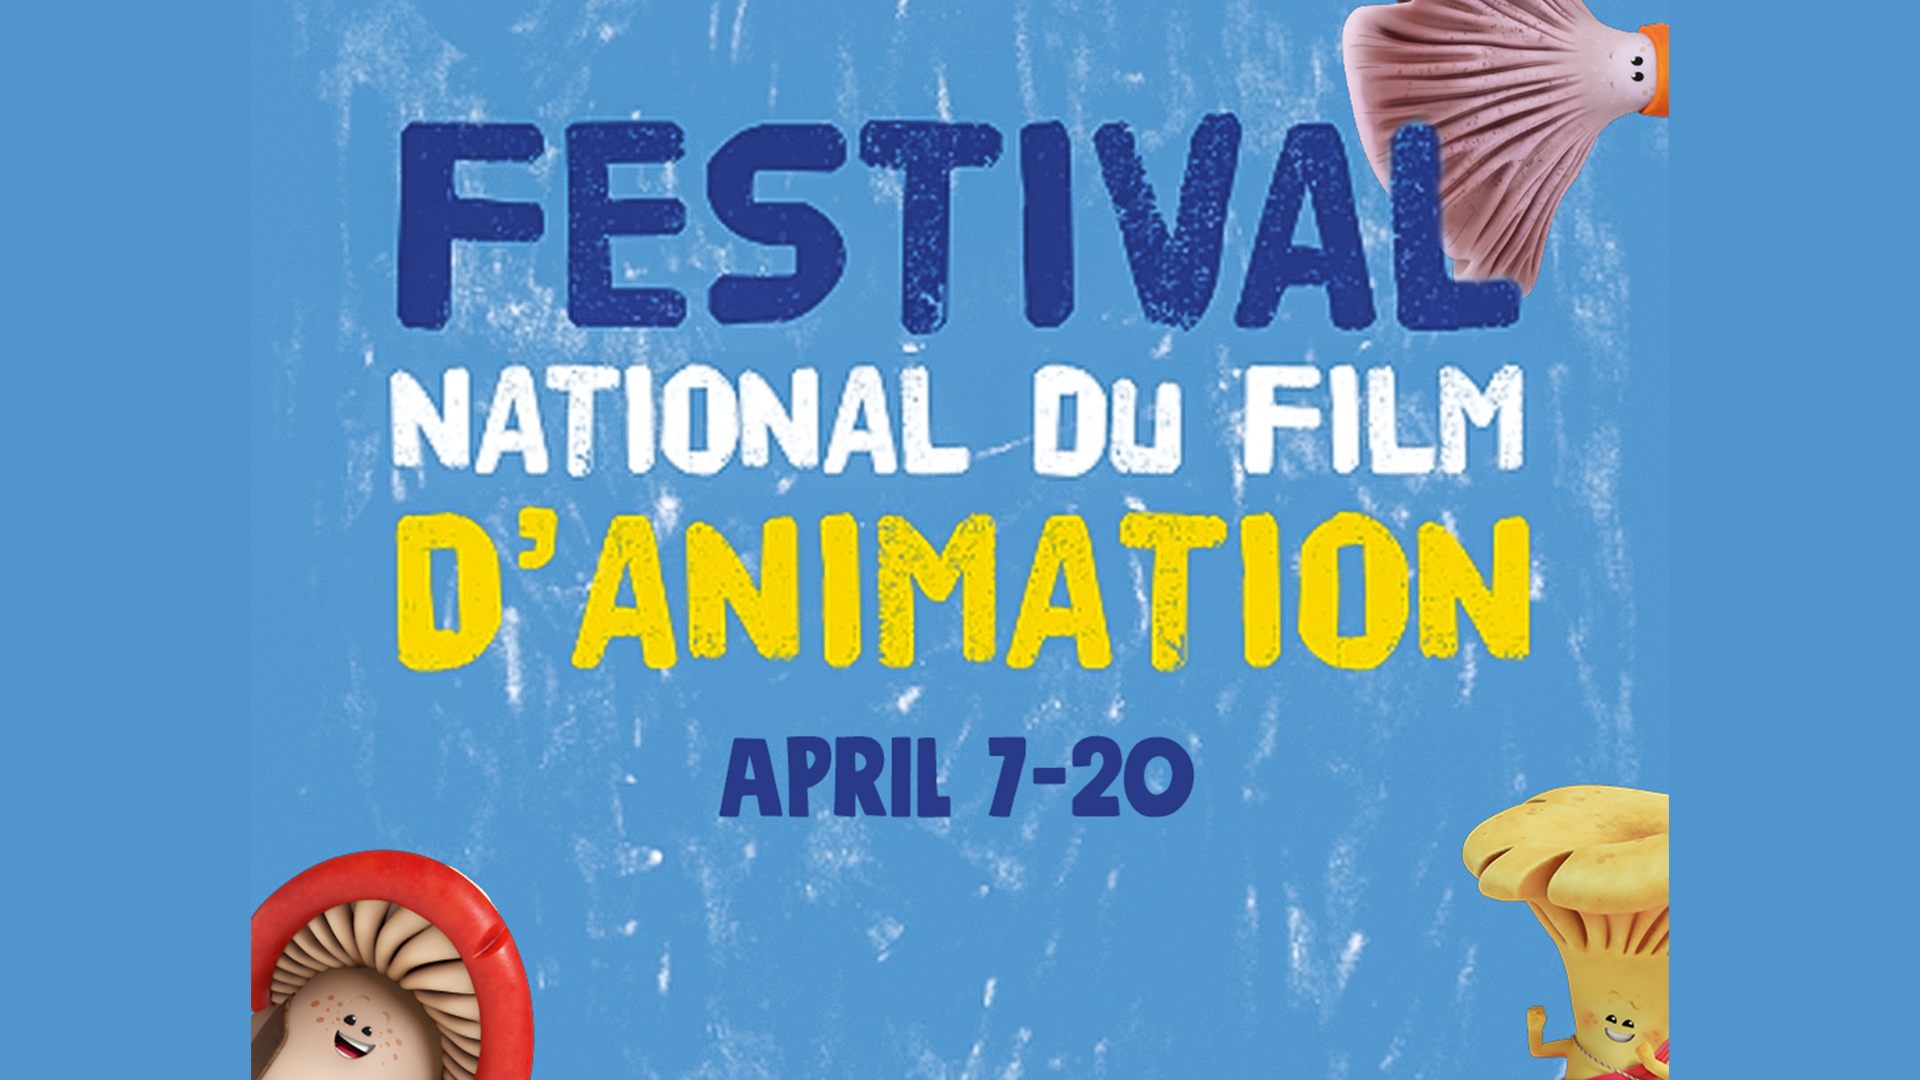 MUSH-MUSH SELECTED FOR THE NATIONAL ANIMATION FESTIVAL IN FRANCE